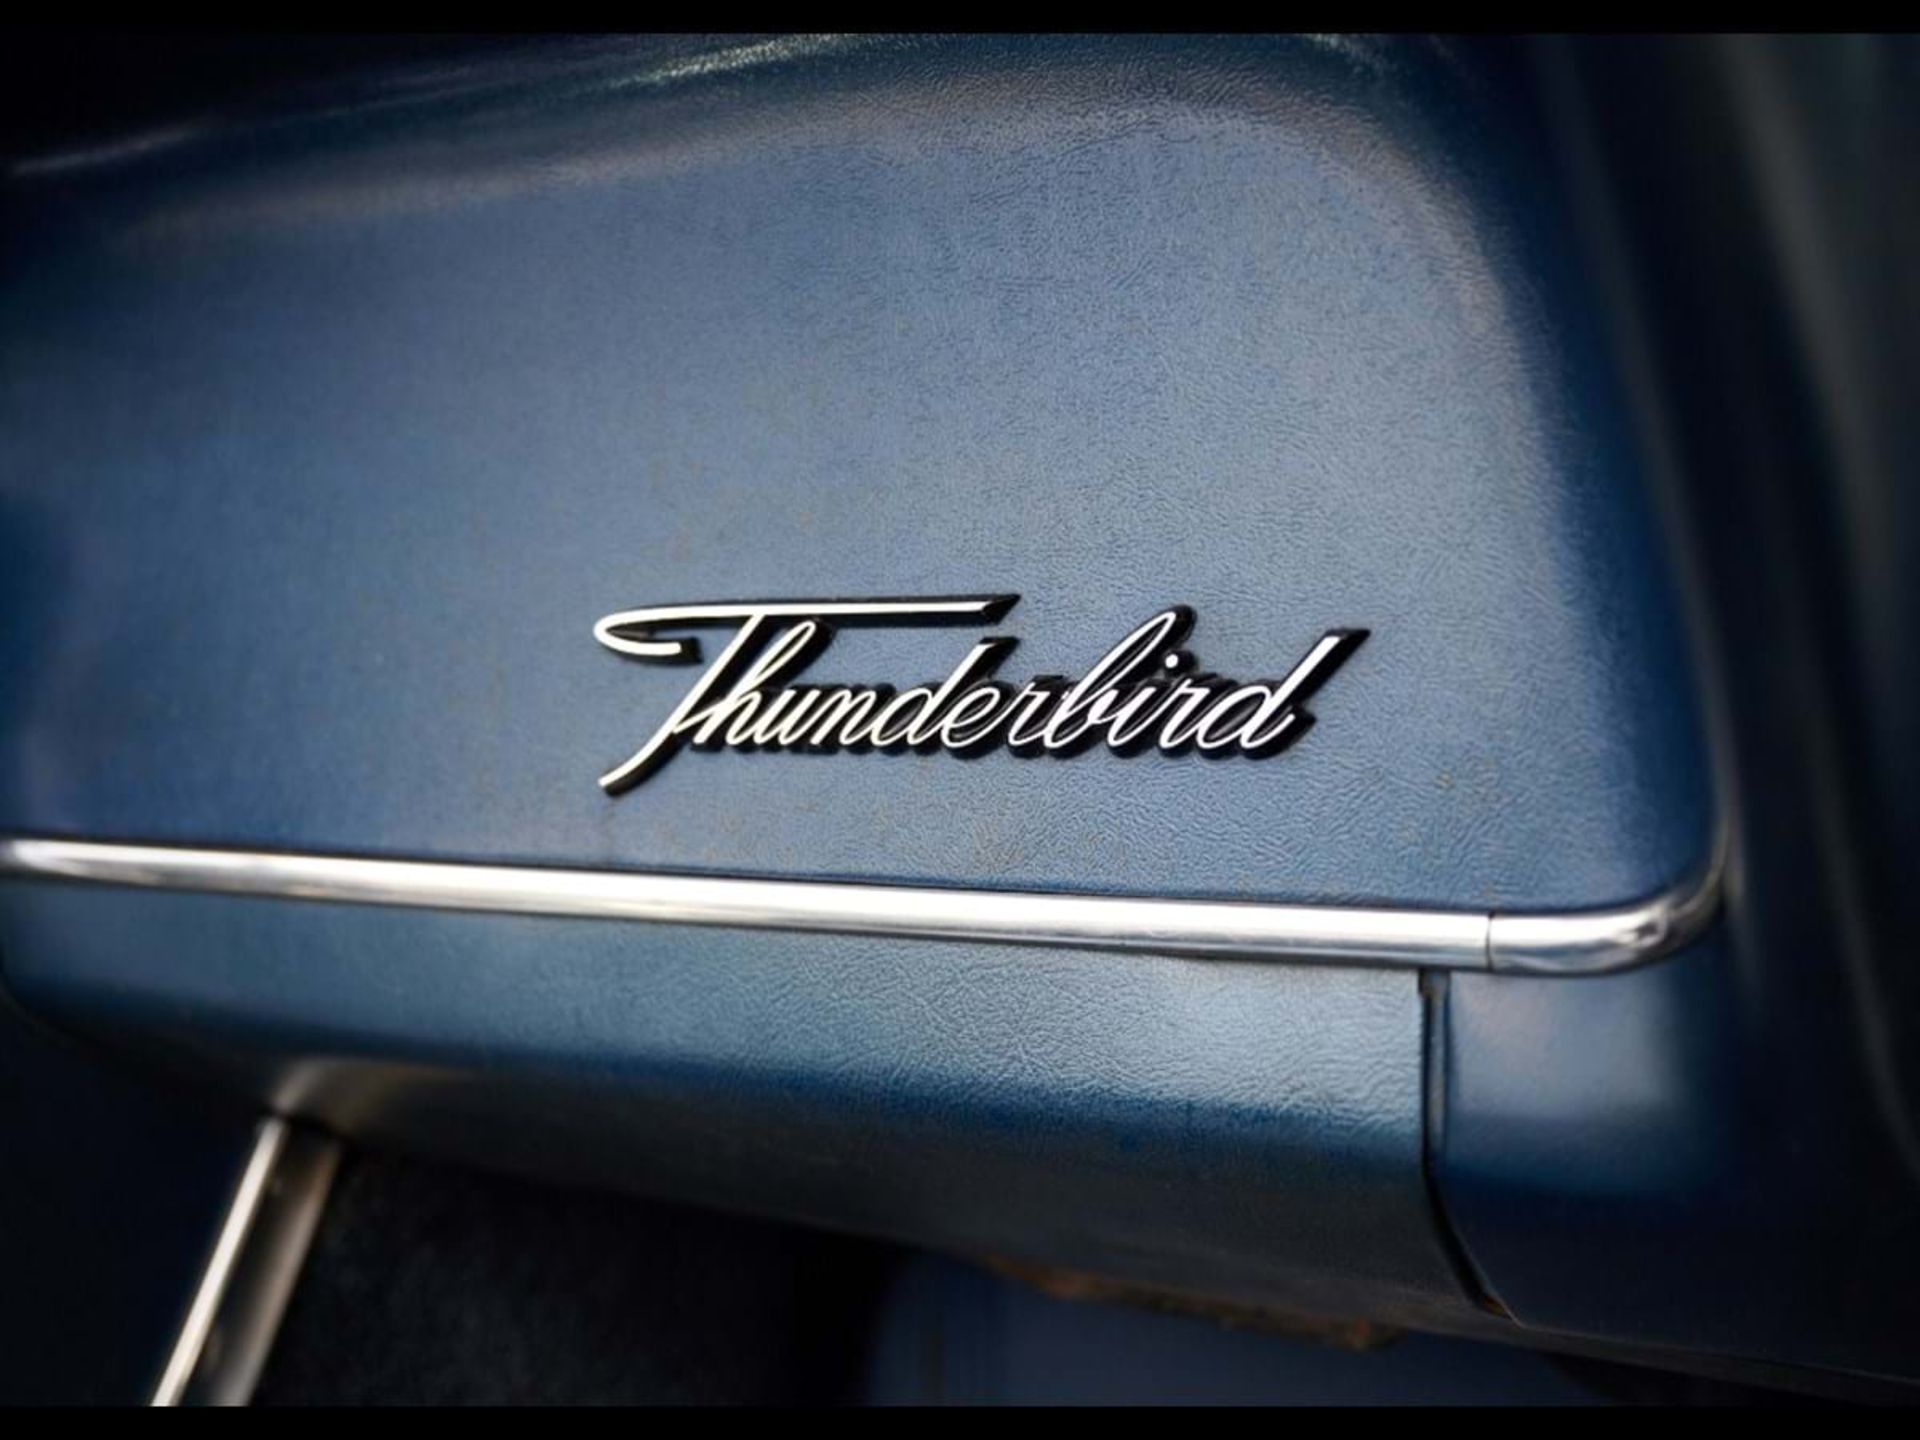 1966 Ford Thunderbird Convertible - Image 22 of 24